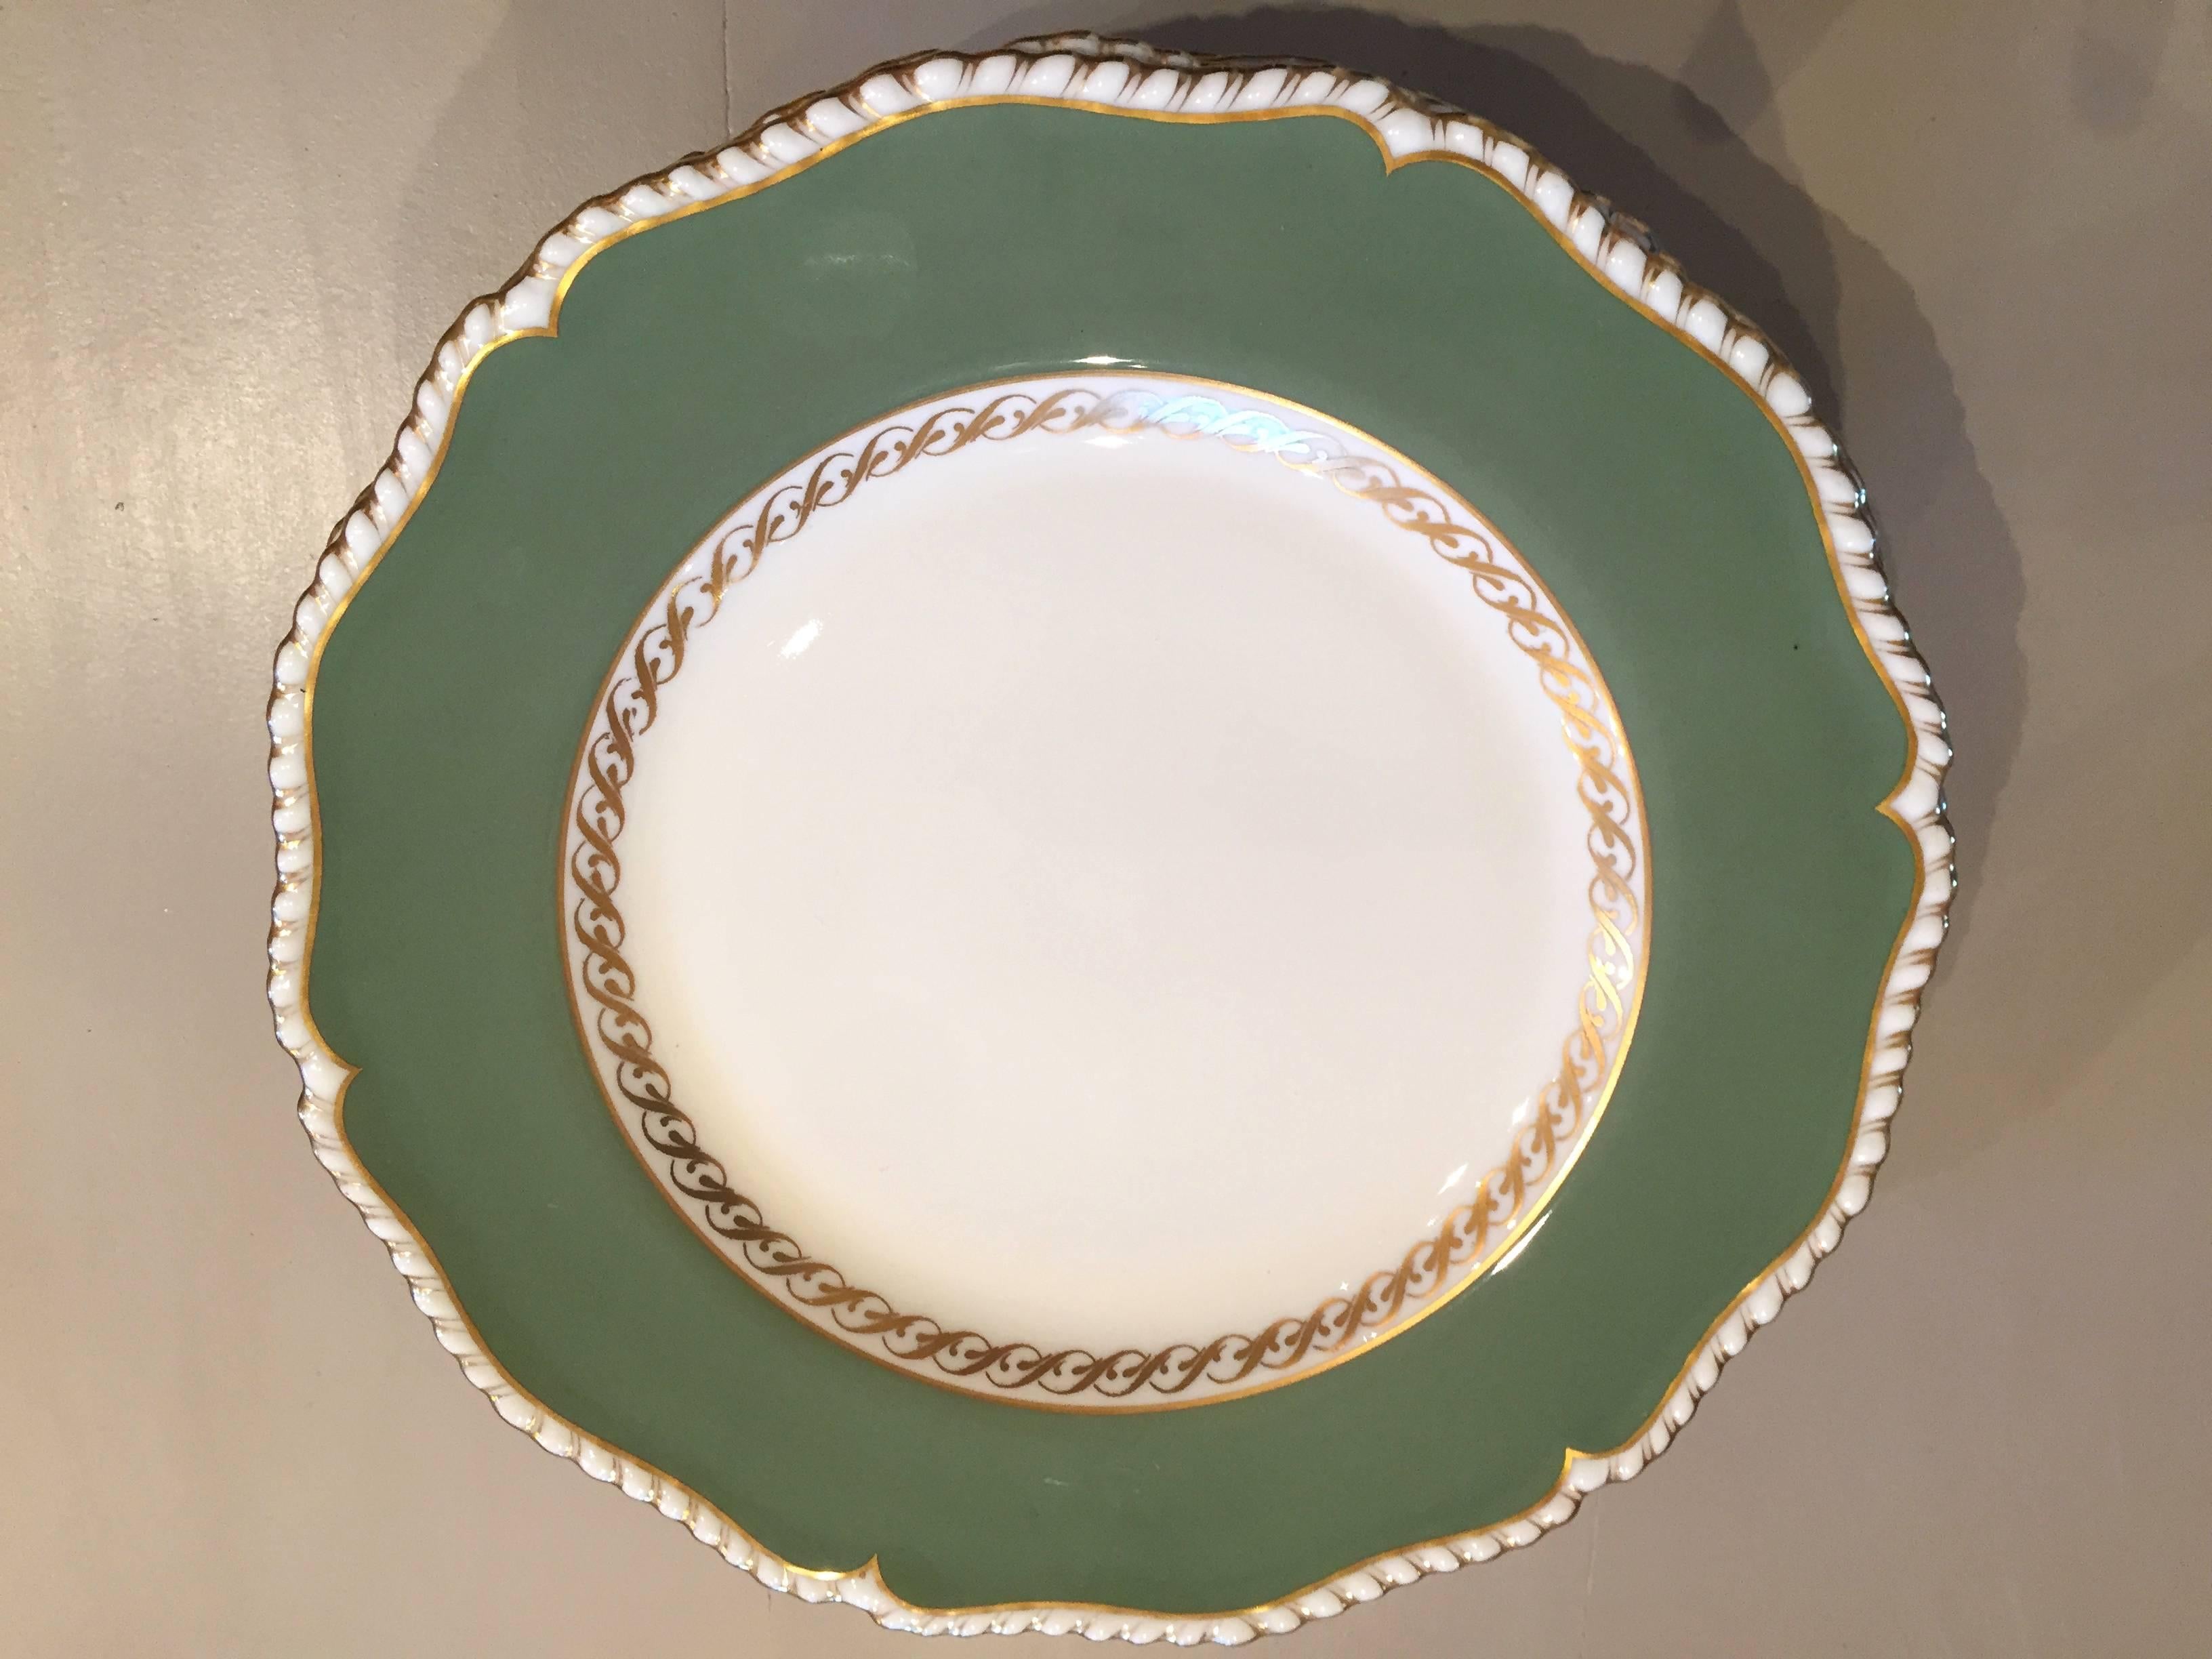 What a beautiful and versatile set of dinner plates or chargers for your holiday table! These beauties are dated 1952 on the reverse, along with the Royal Worcester mark, and are all in perfect, possibly unused, condition. The lovely dark sage green